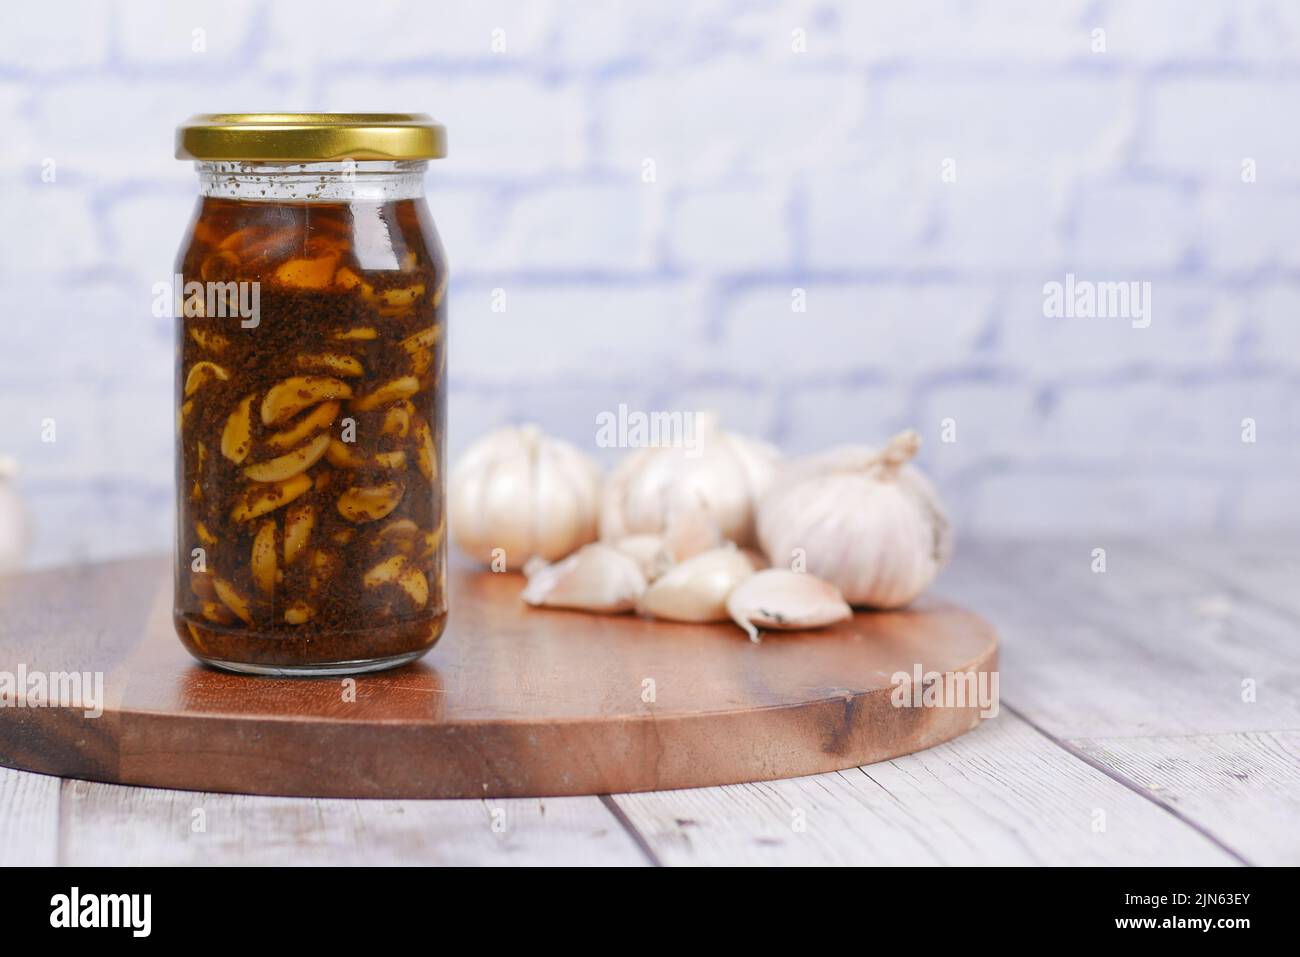 Homemade Garlic Pickle in a glass jar on table , Stock Photo